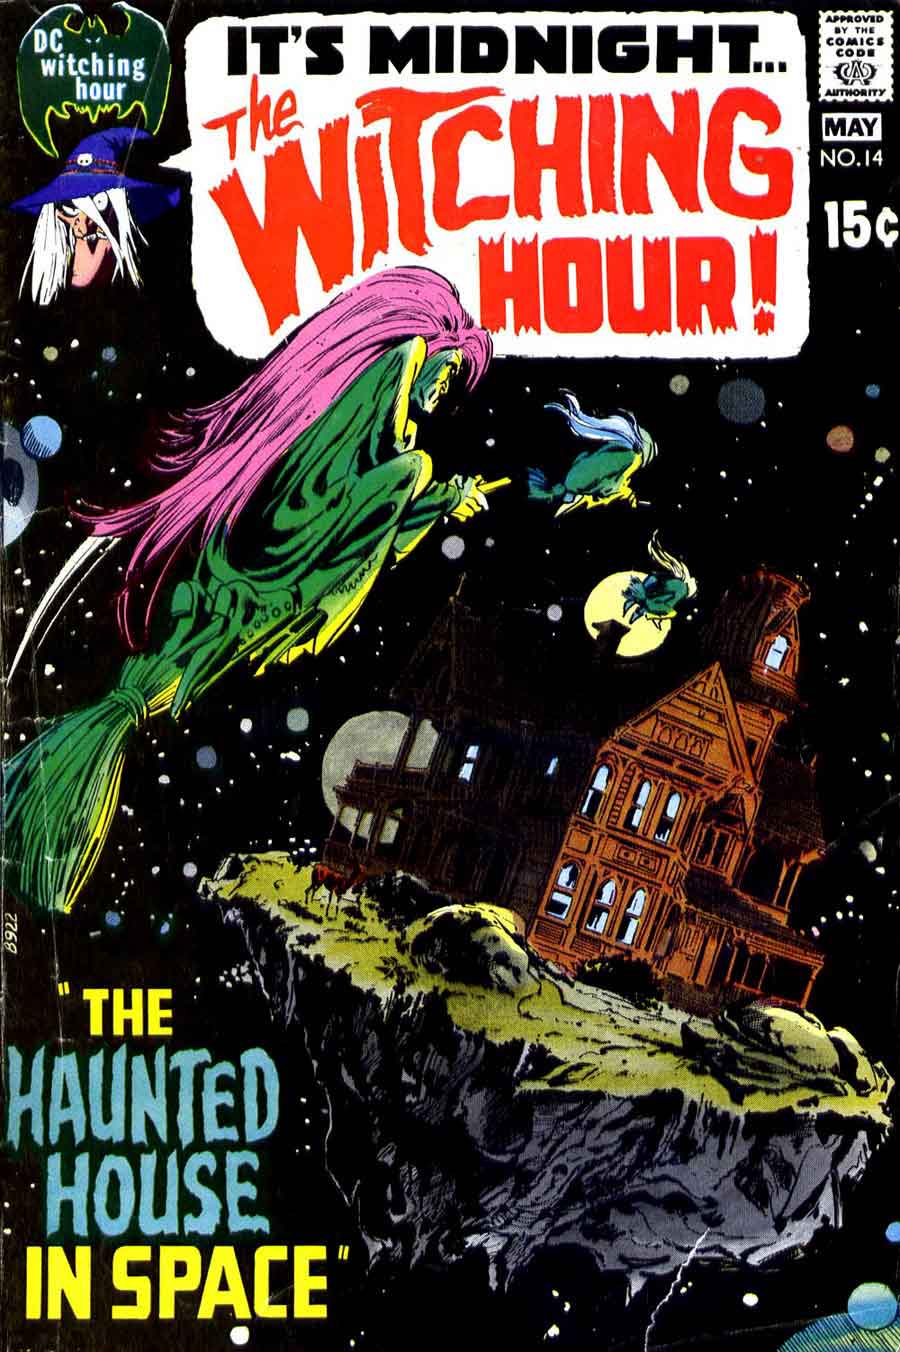 Neal Adams dc science fiction horror bronze age 1970s comic book cover art - Witching Hour #14